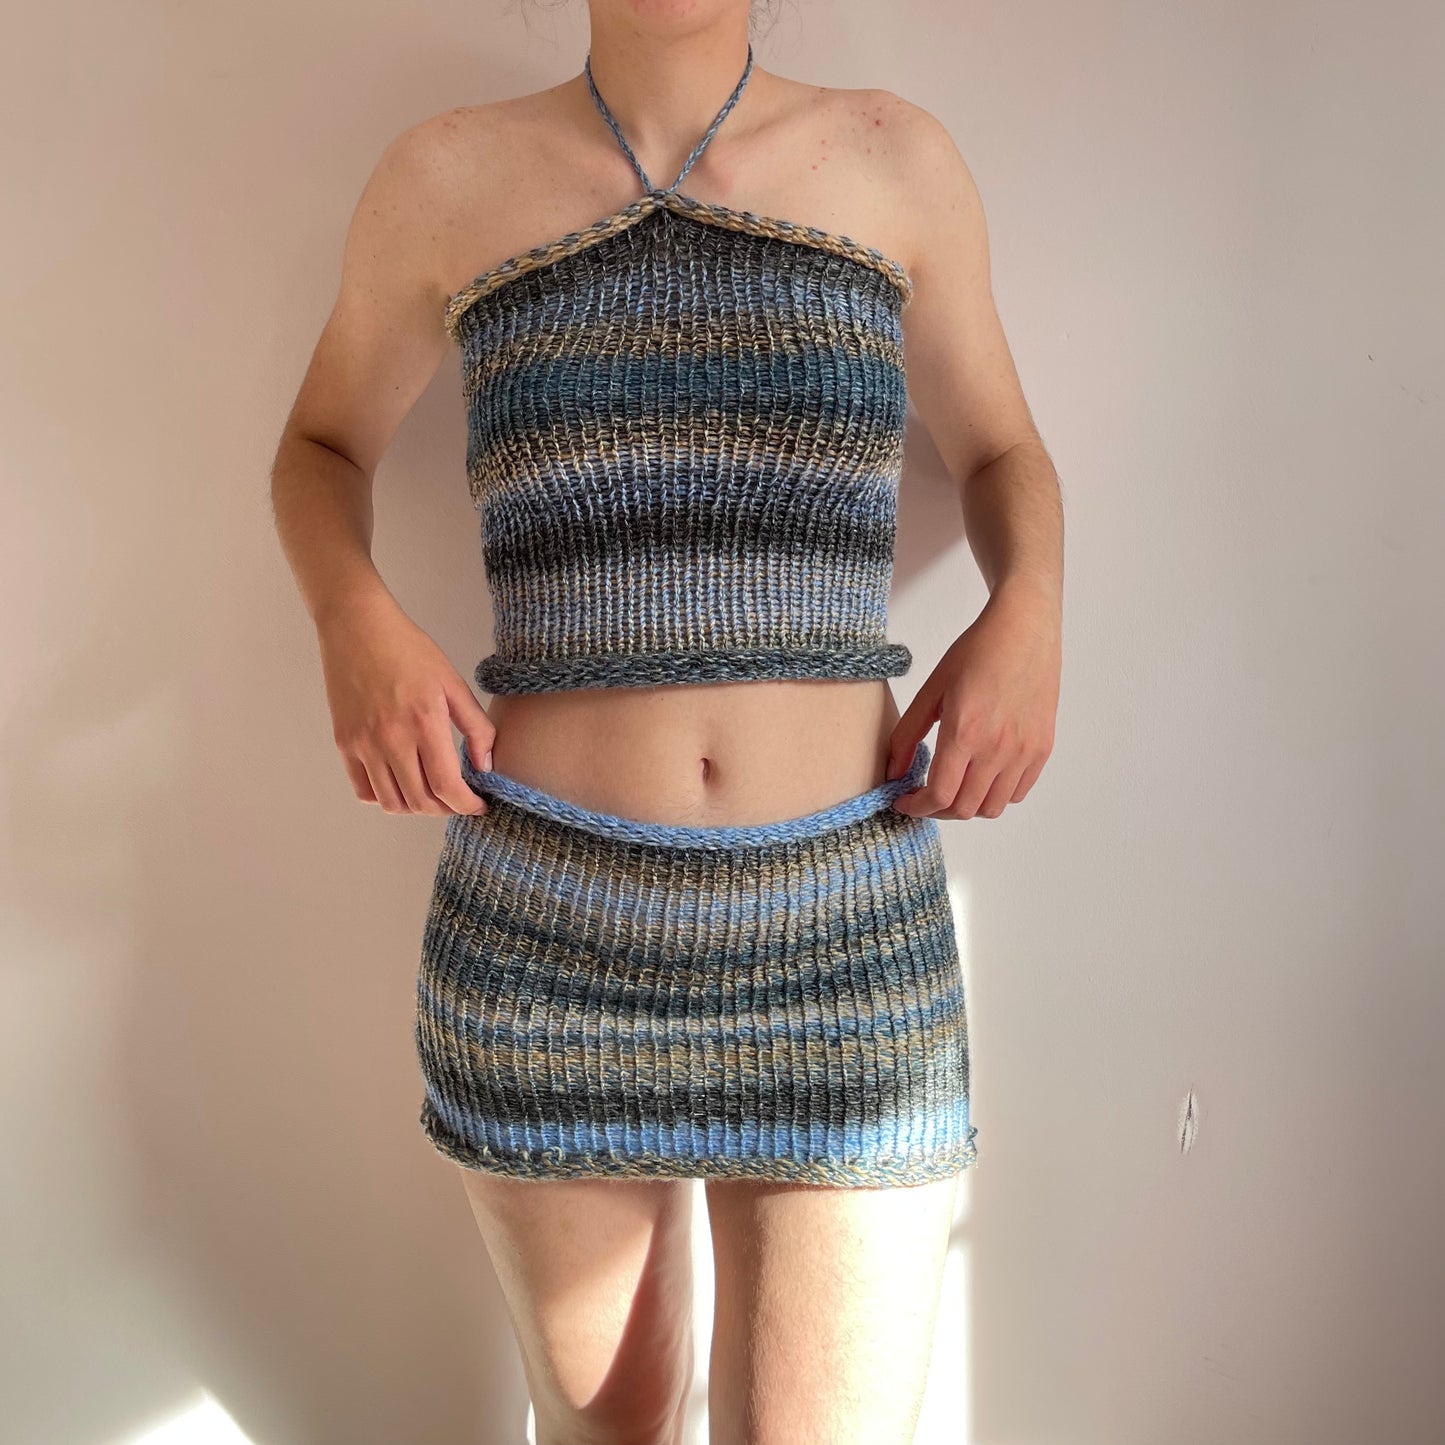 Handmade knitted halter top in blue, beige and grey